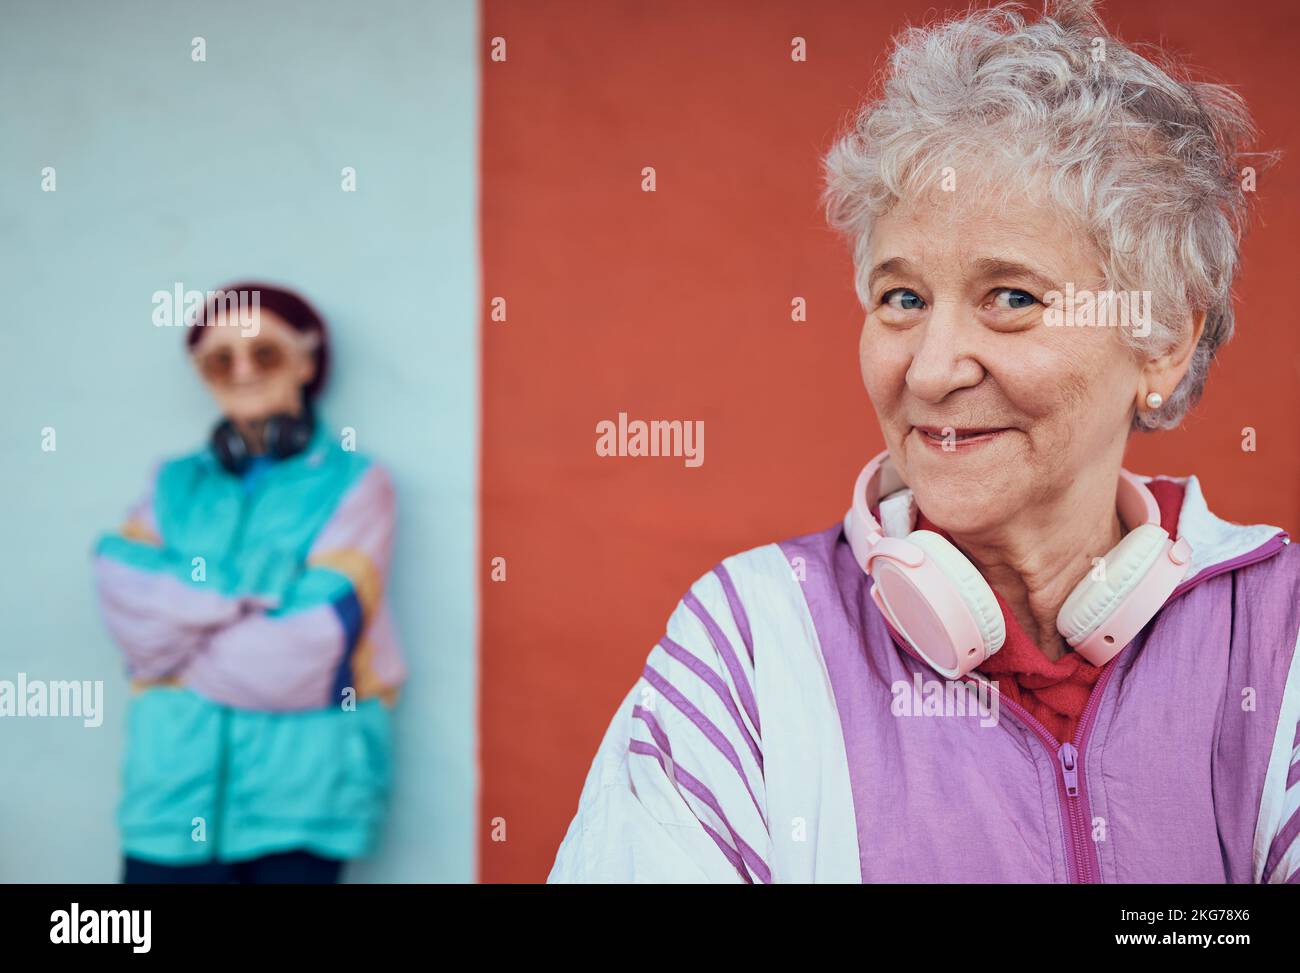 Music, hip hop and senior women with street style, urban smile and 5g headphones in the city. Pride, happy and face portrait of an elderly lady in Stock Photo